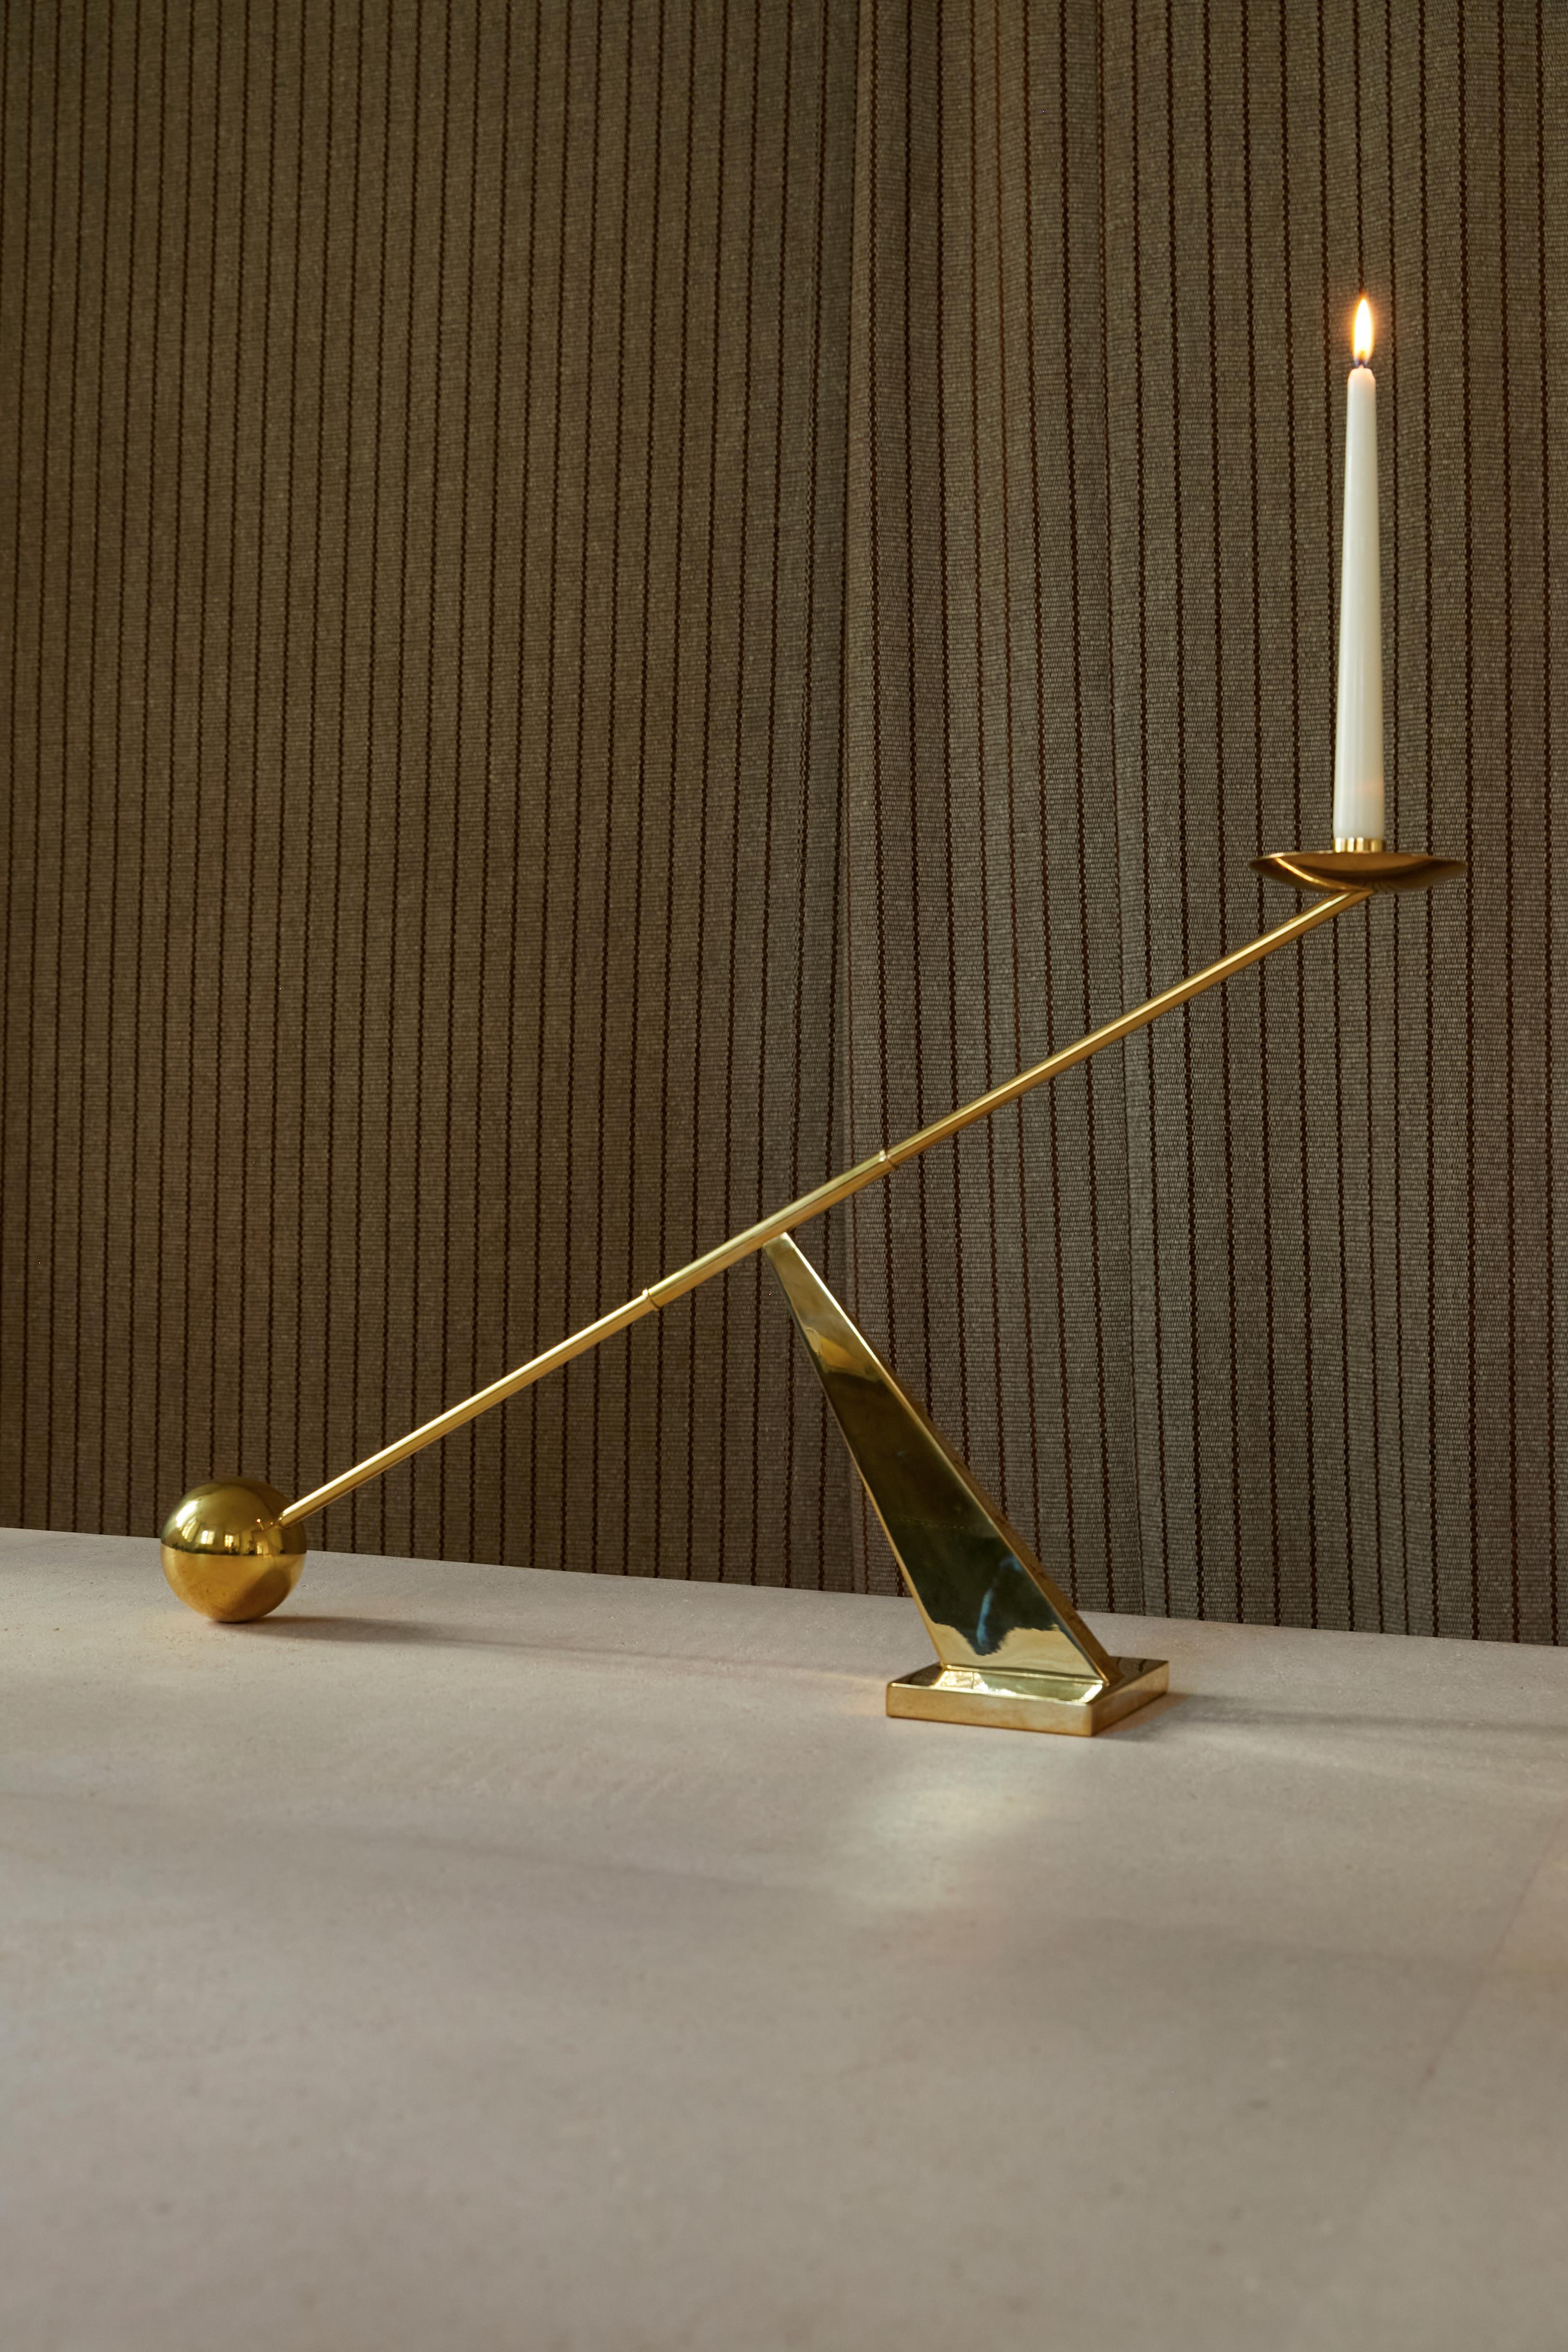 
Brass table candelabra characterized for its simple geometric figure. A sphere, an angle and a line, that come together to create this unique design. 